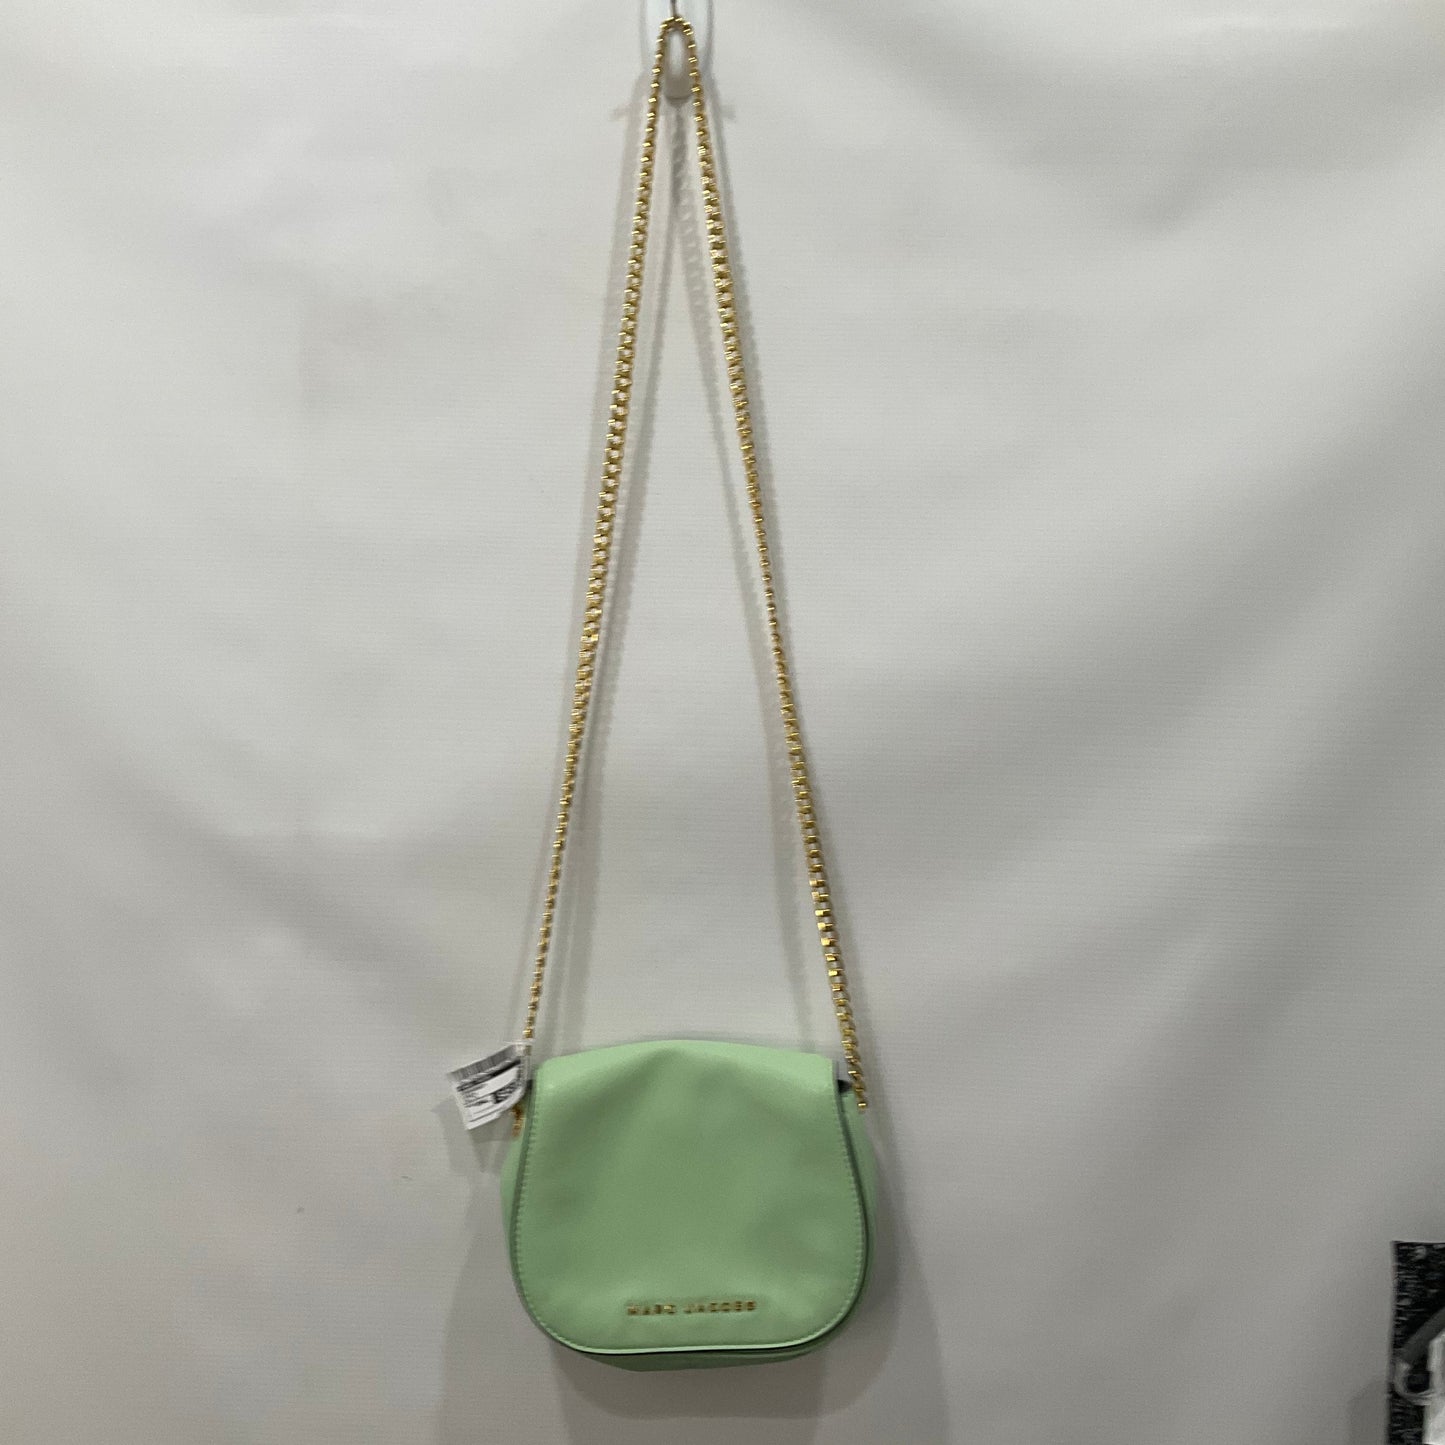 Crossbody Marc Jacobs, Size Small